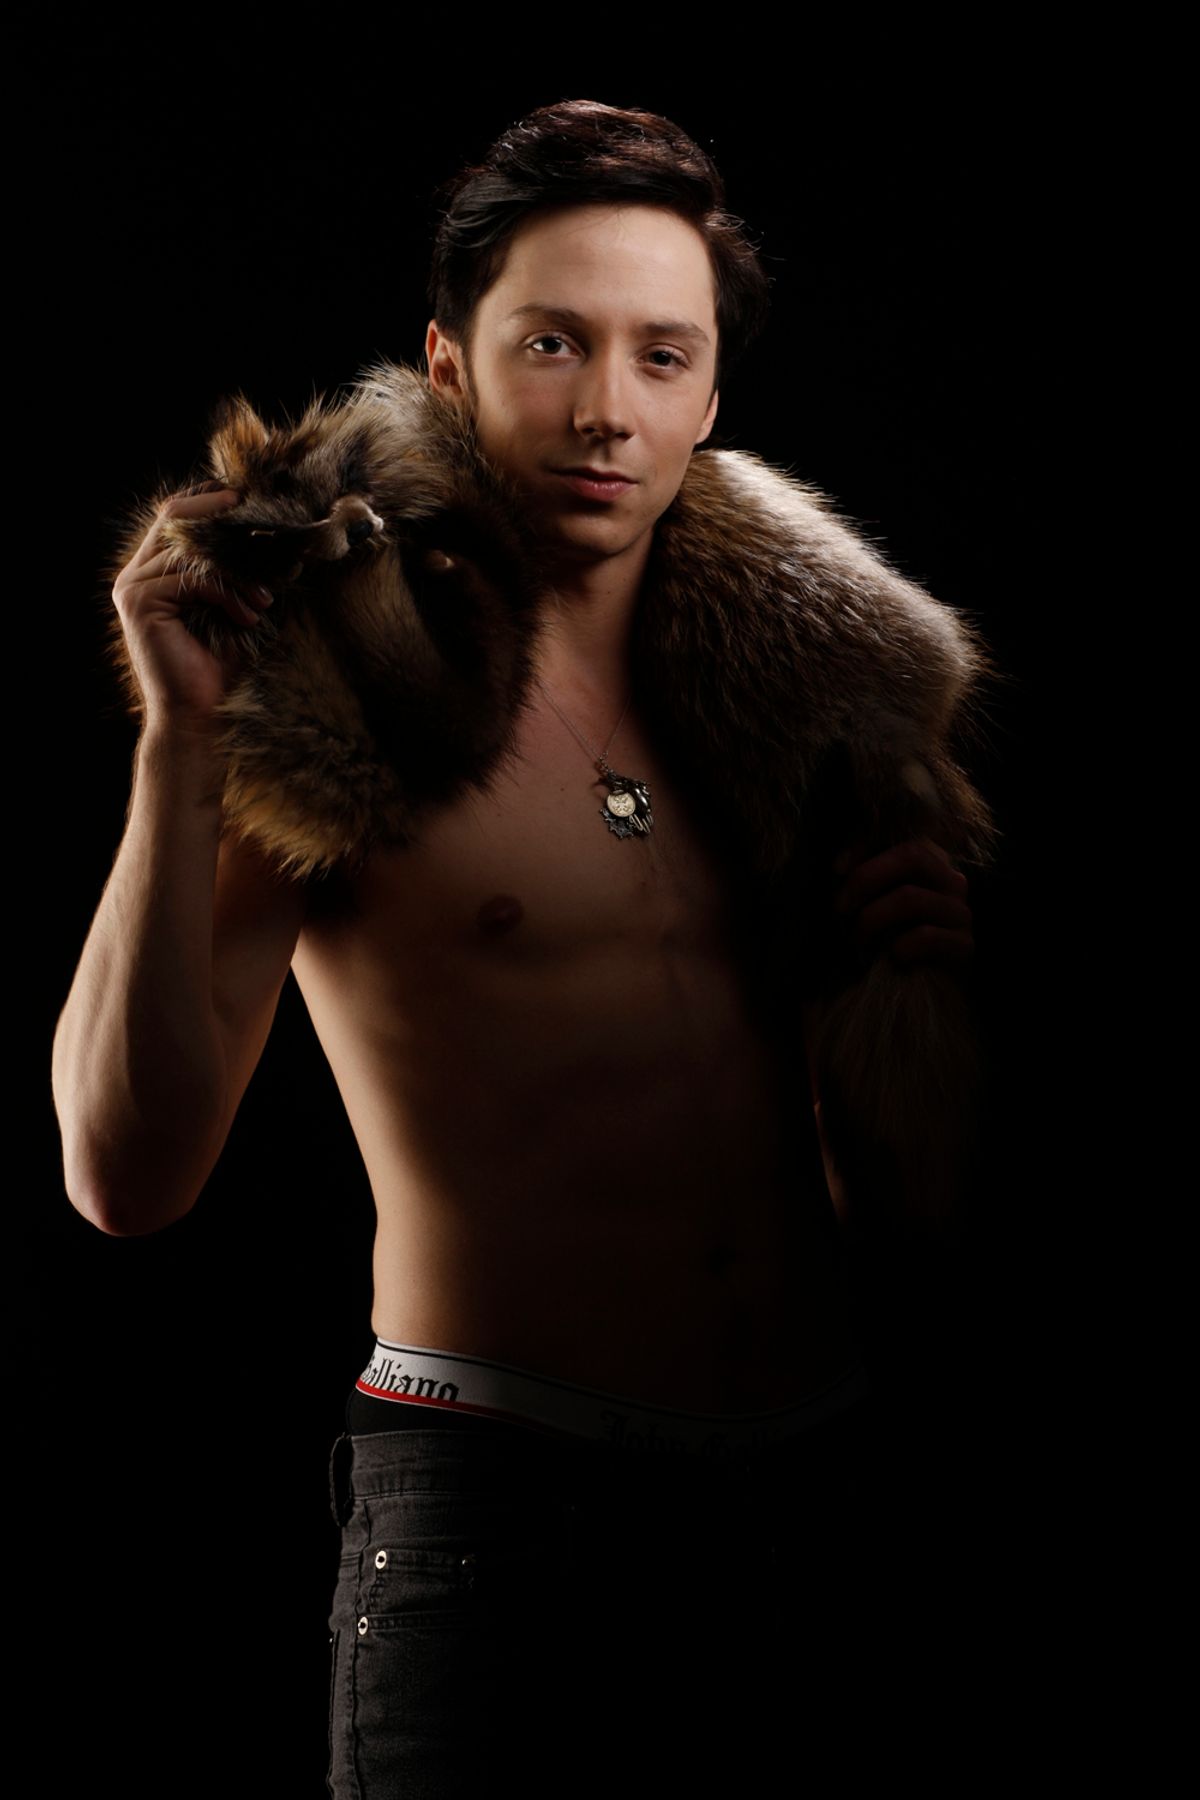 Men's figure skater Johnny Weir poses with a fox pelt during the 2010 U.S. Olympic Team Media Summit in Chicago, September 11, 2009. REUTERS/John Gress (UNITED STATES SPORT OLYMPICS FIGURE SKATING) (Â© John Gress / Reuters)